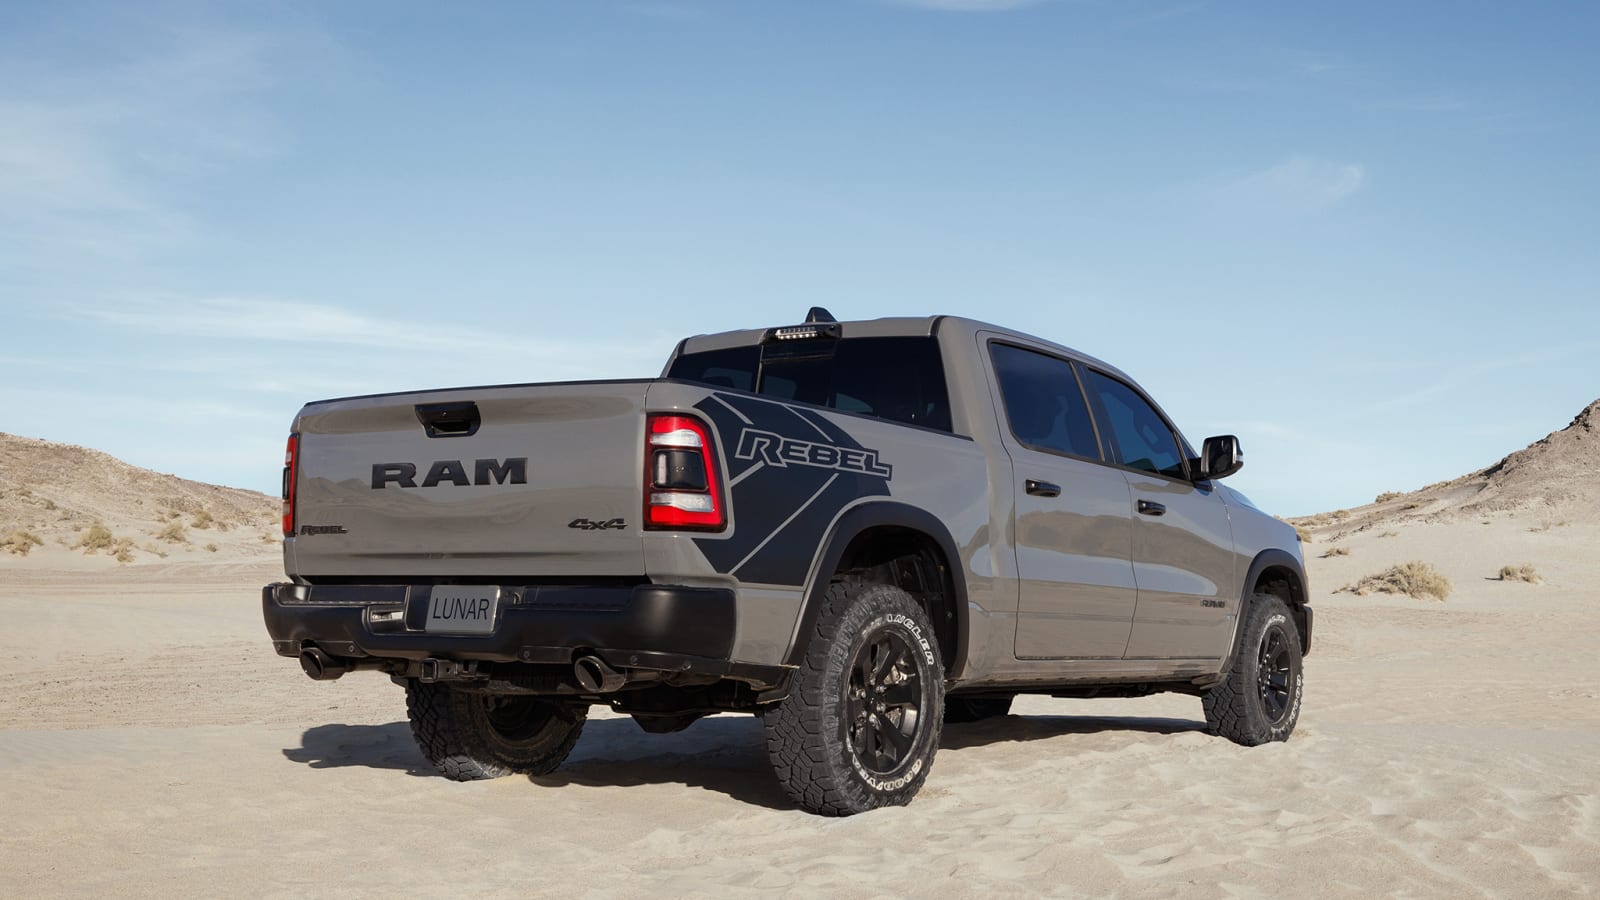 2023 Ram 1500 TRX and Rebel Lunar Editions are ready to howl at the